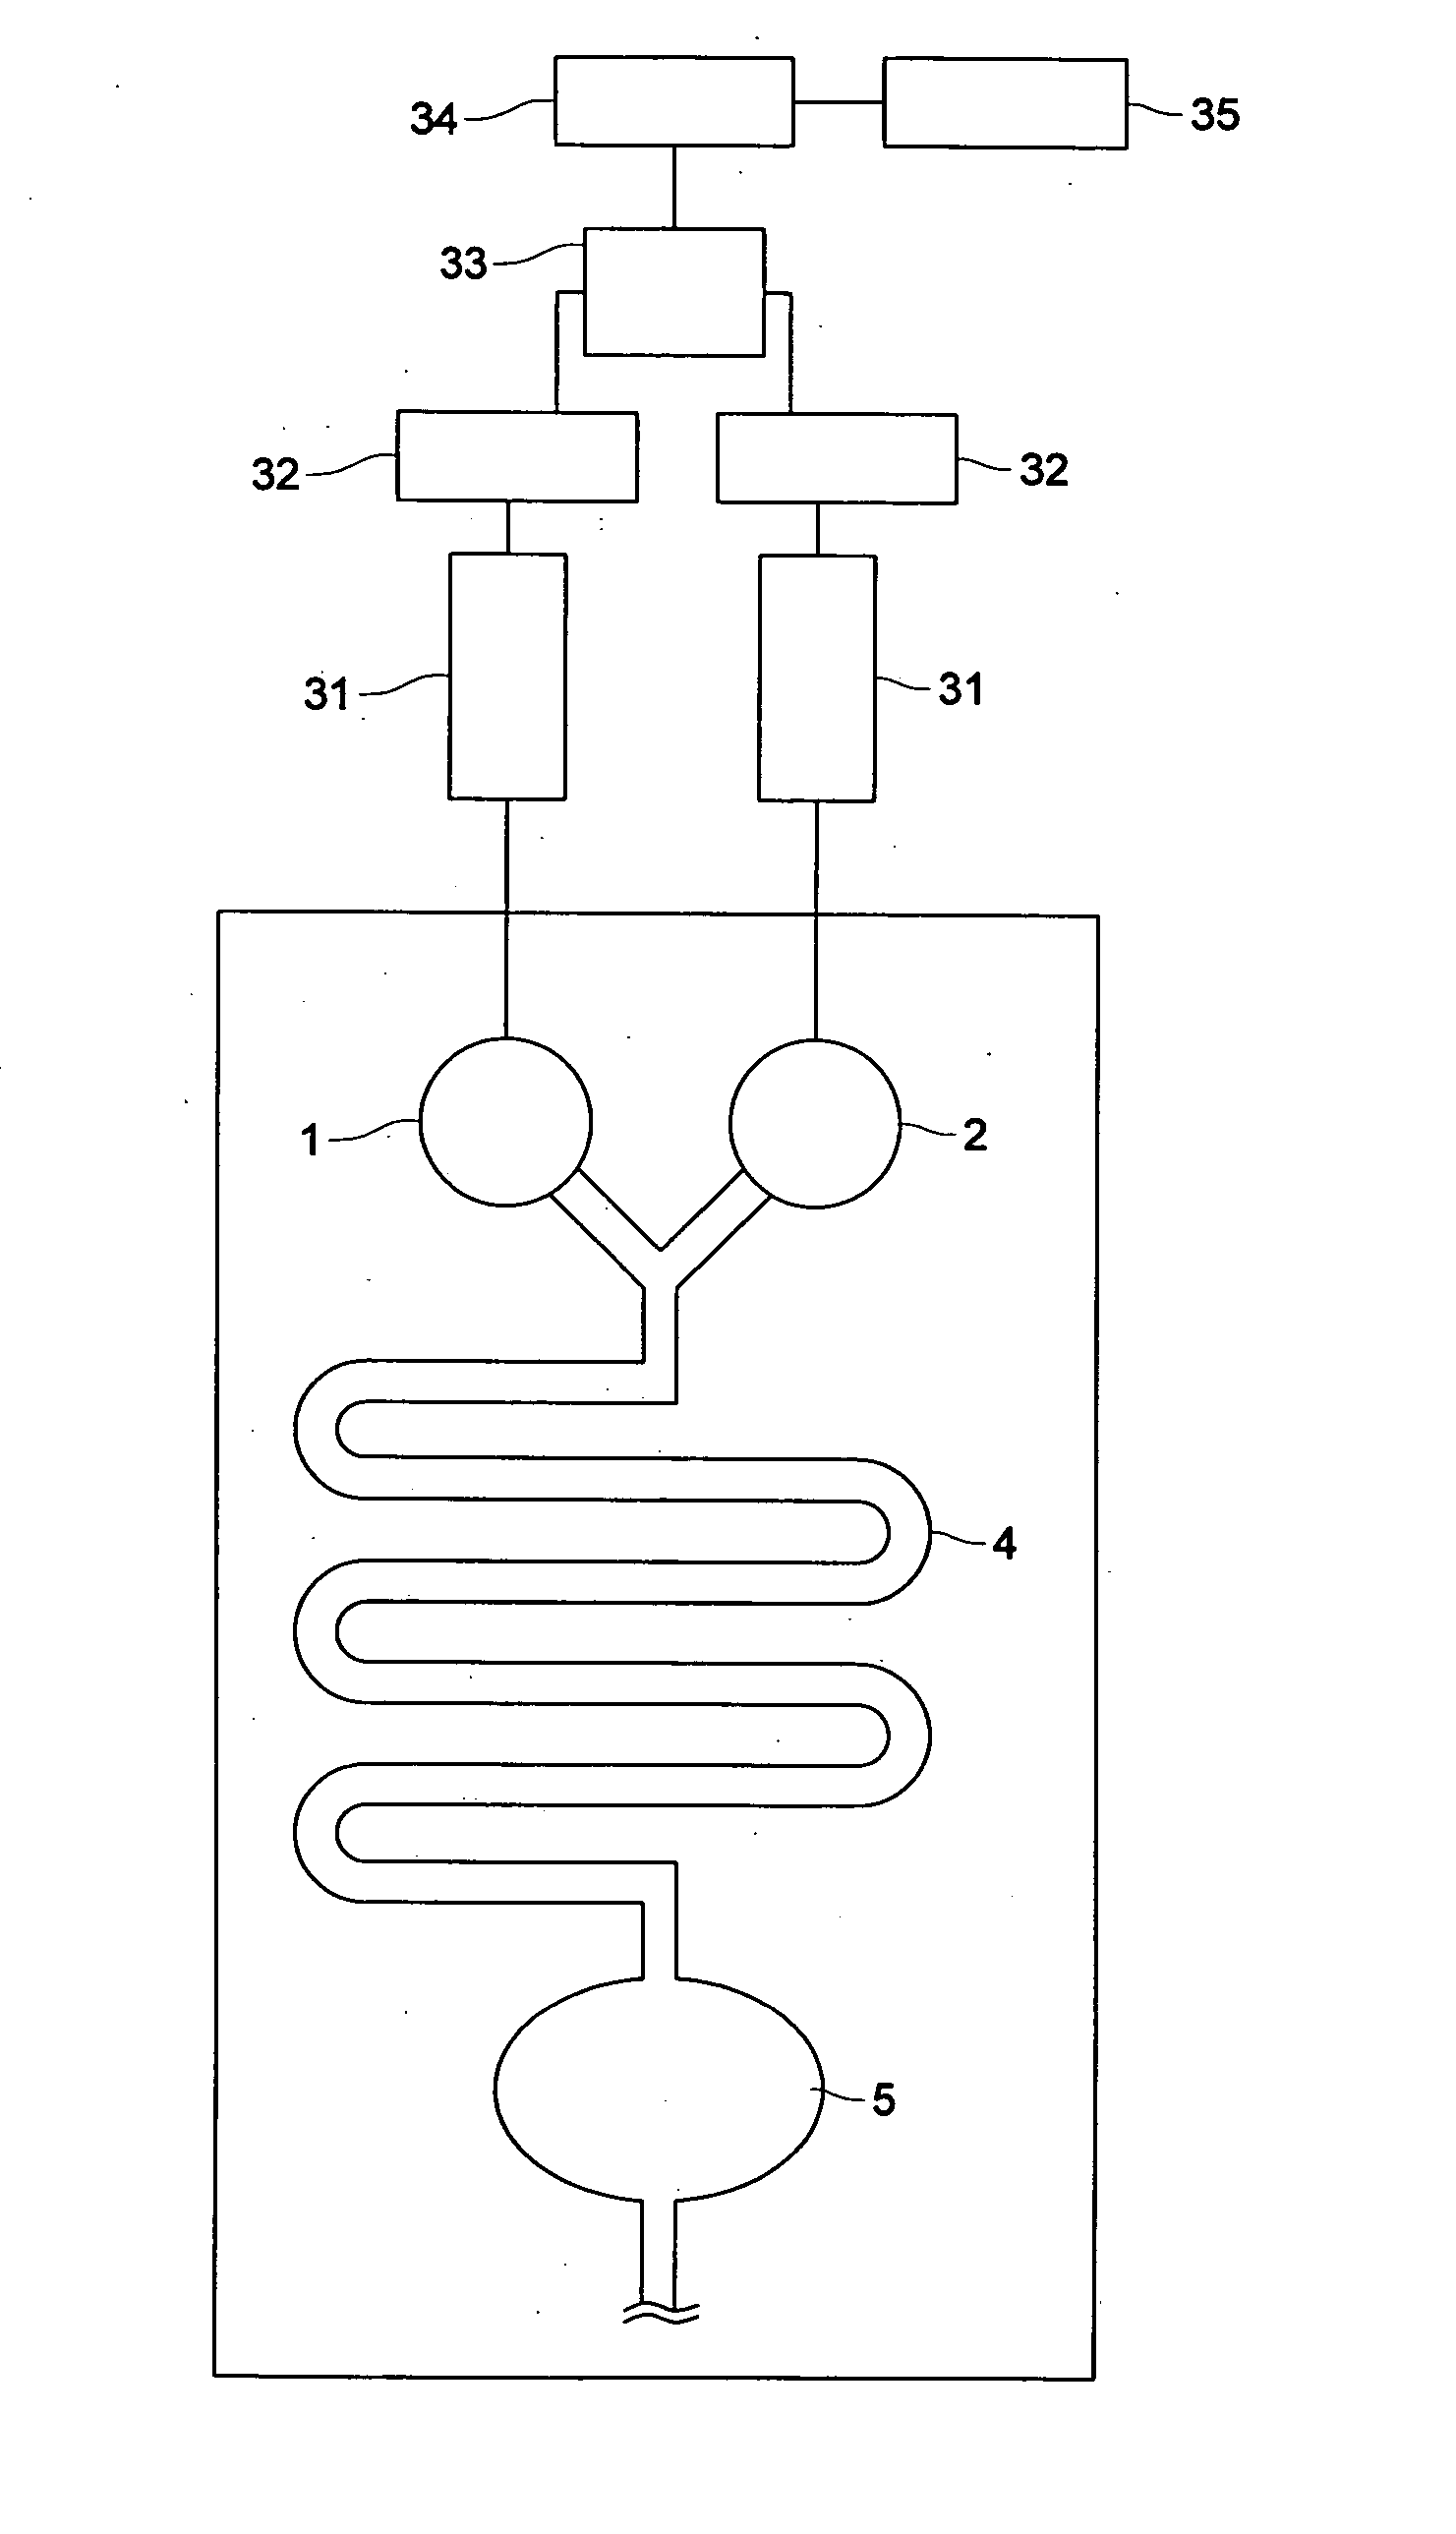 Micro-reactor for improving efficiency of liquid mixing and reaction